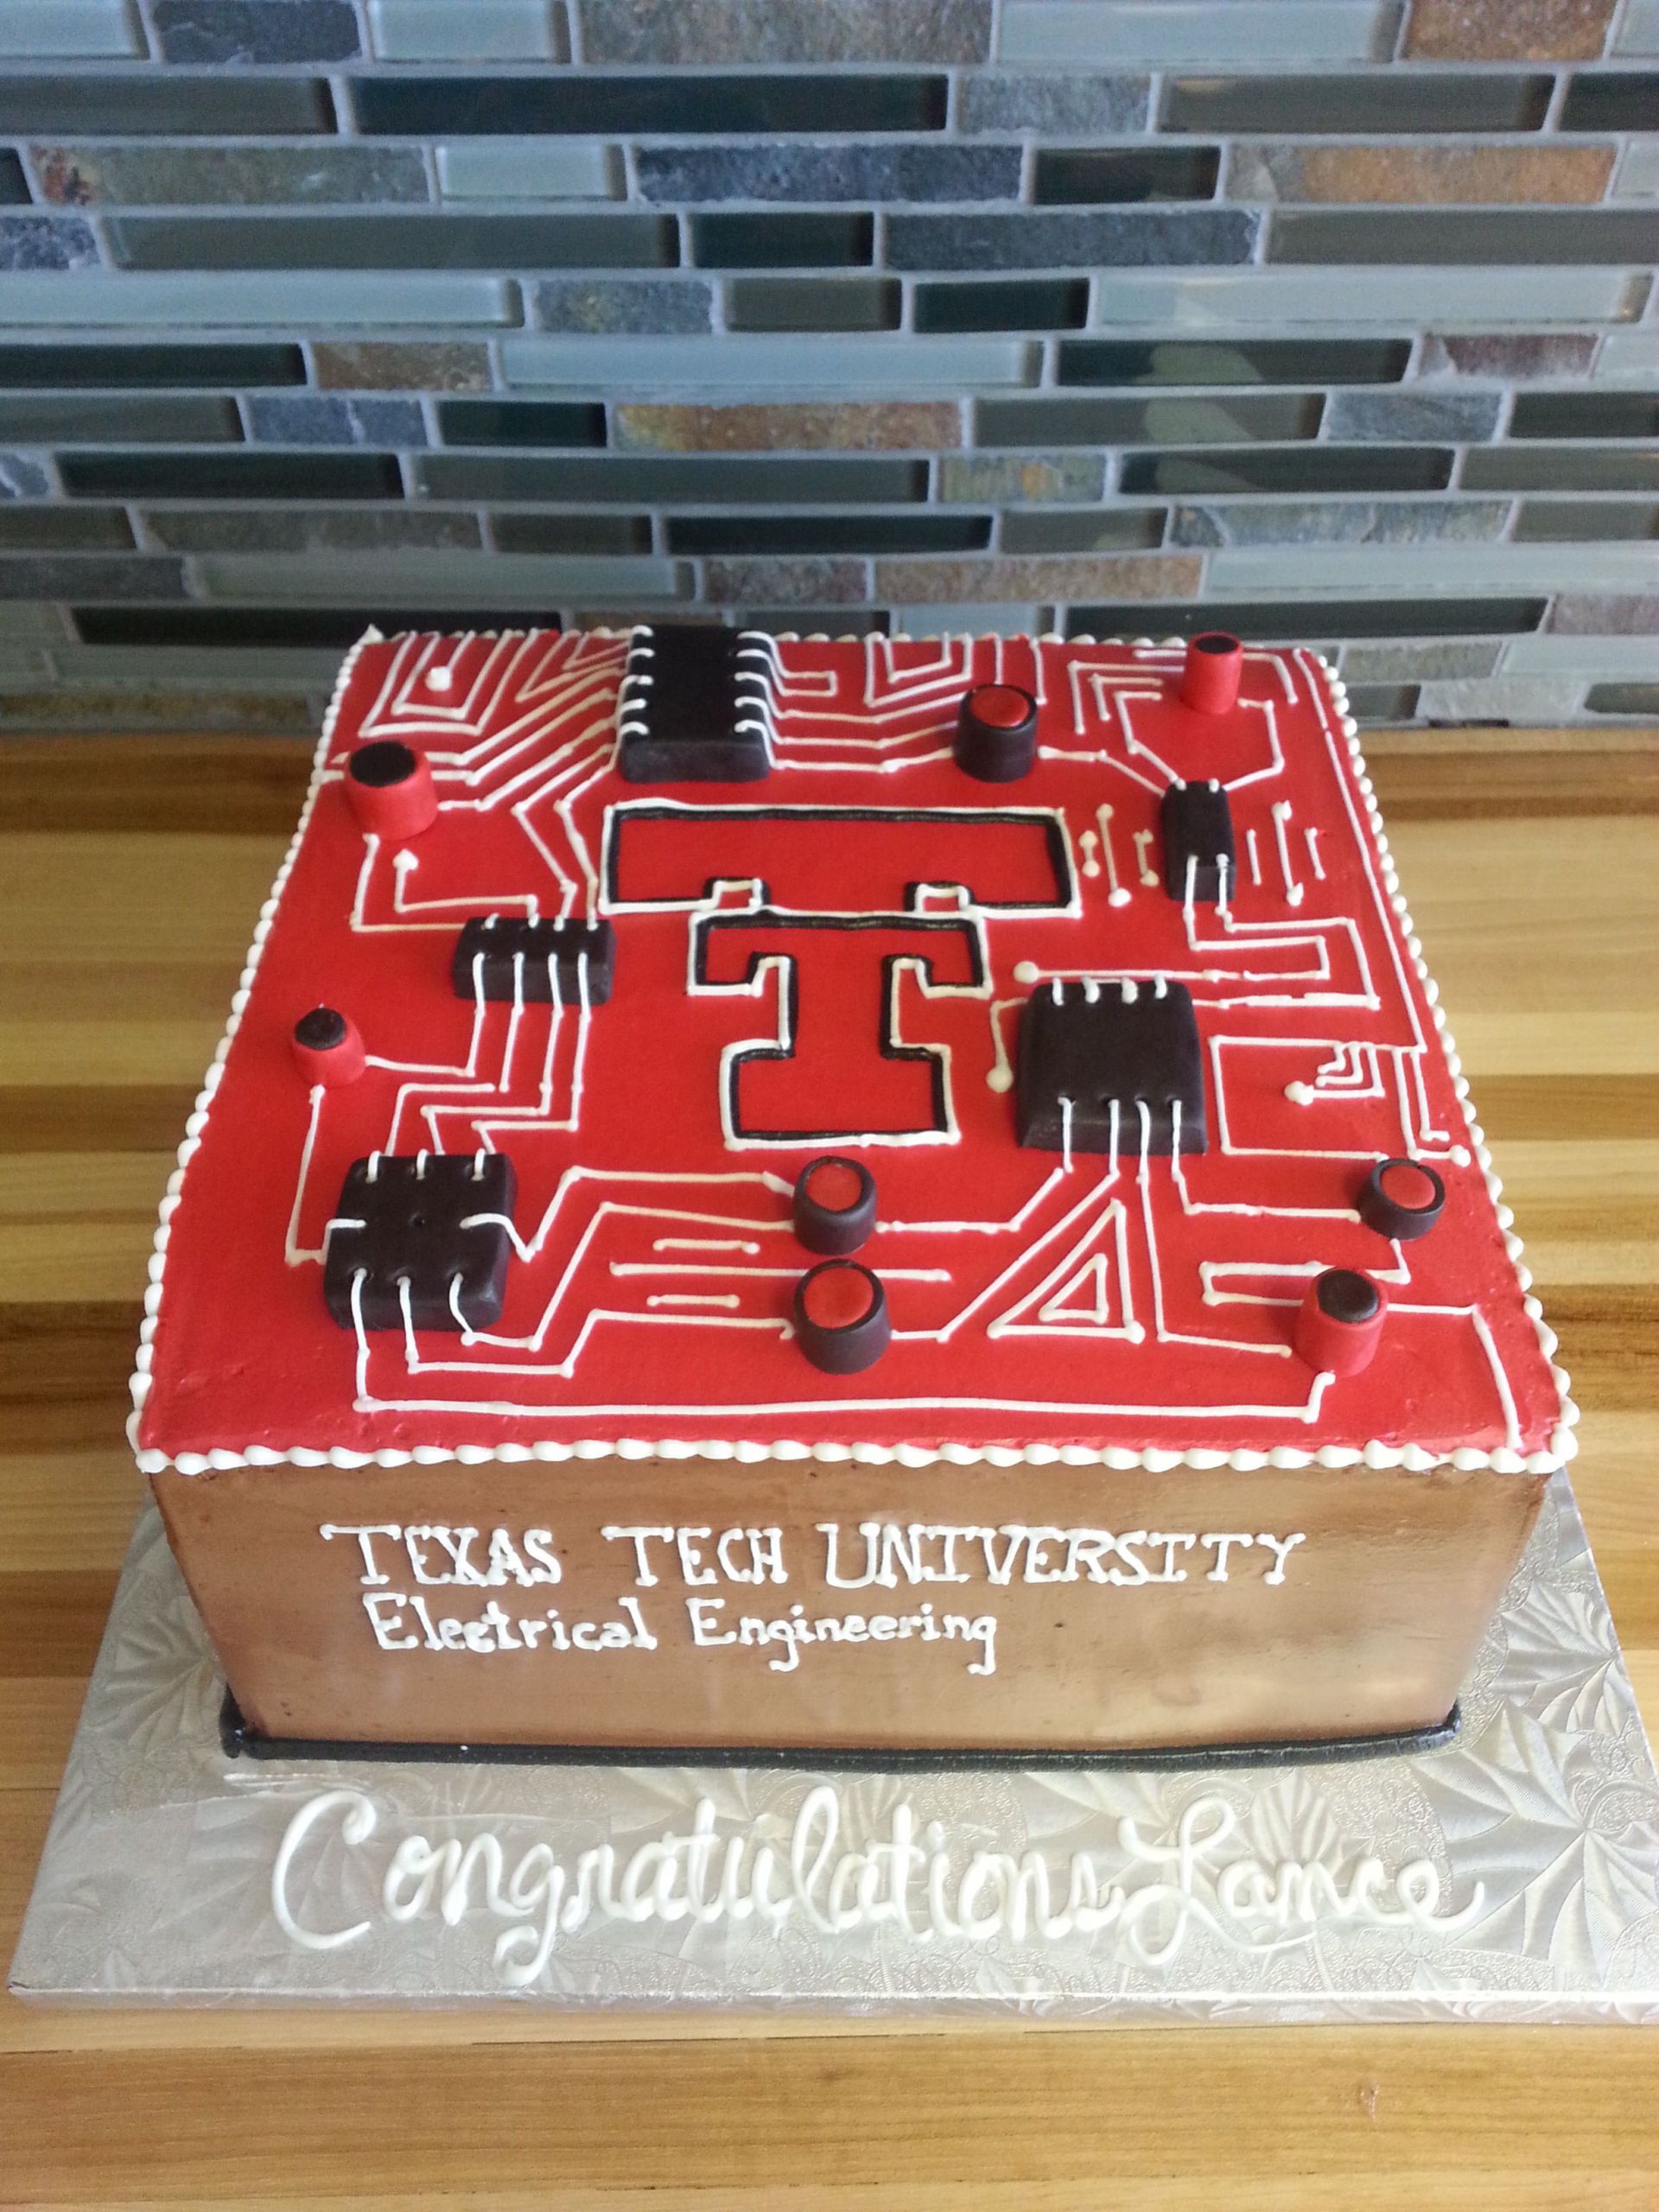 Electrical Engineering Graduation Party Ideas
 Electrical engineering graduation cake